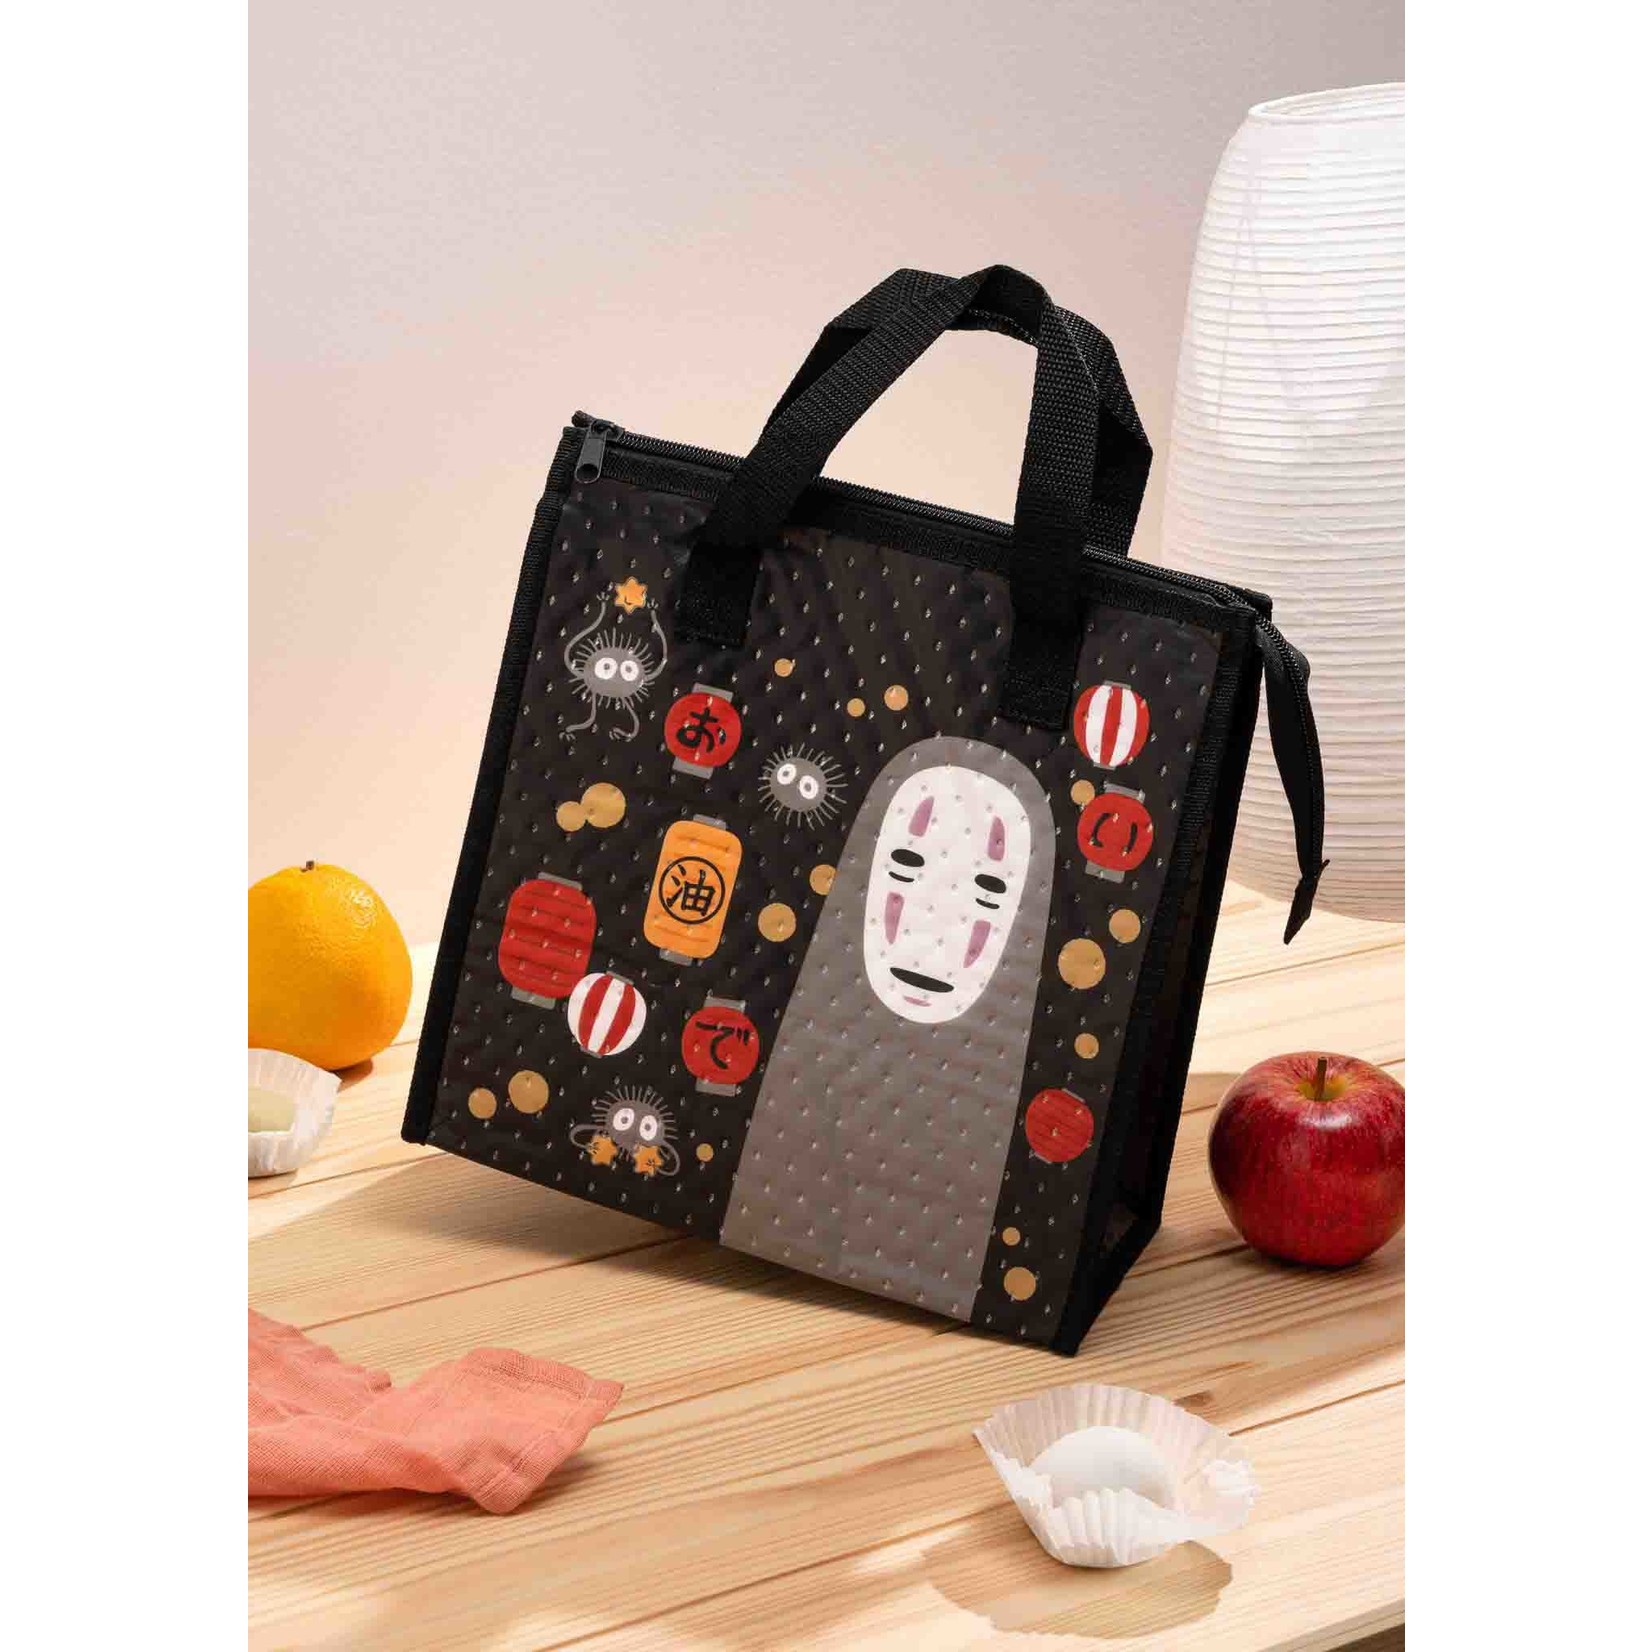 Skater Insulated Lunch Tote - Spirited Away (Lanterns) SK-088